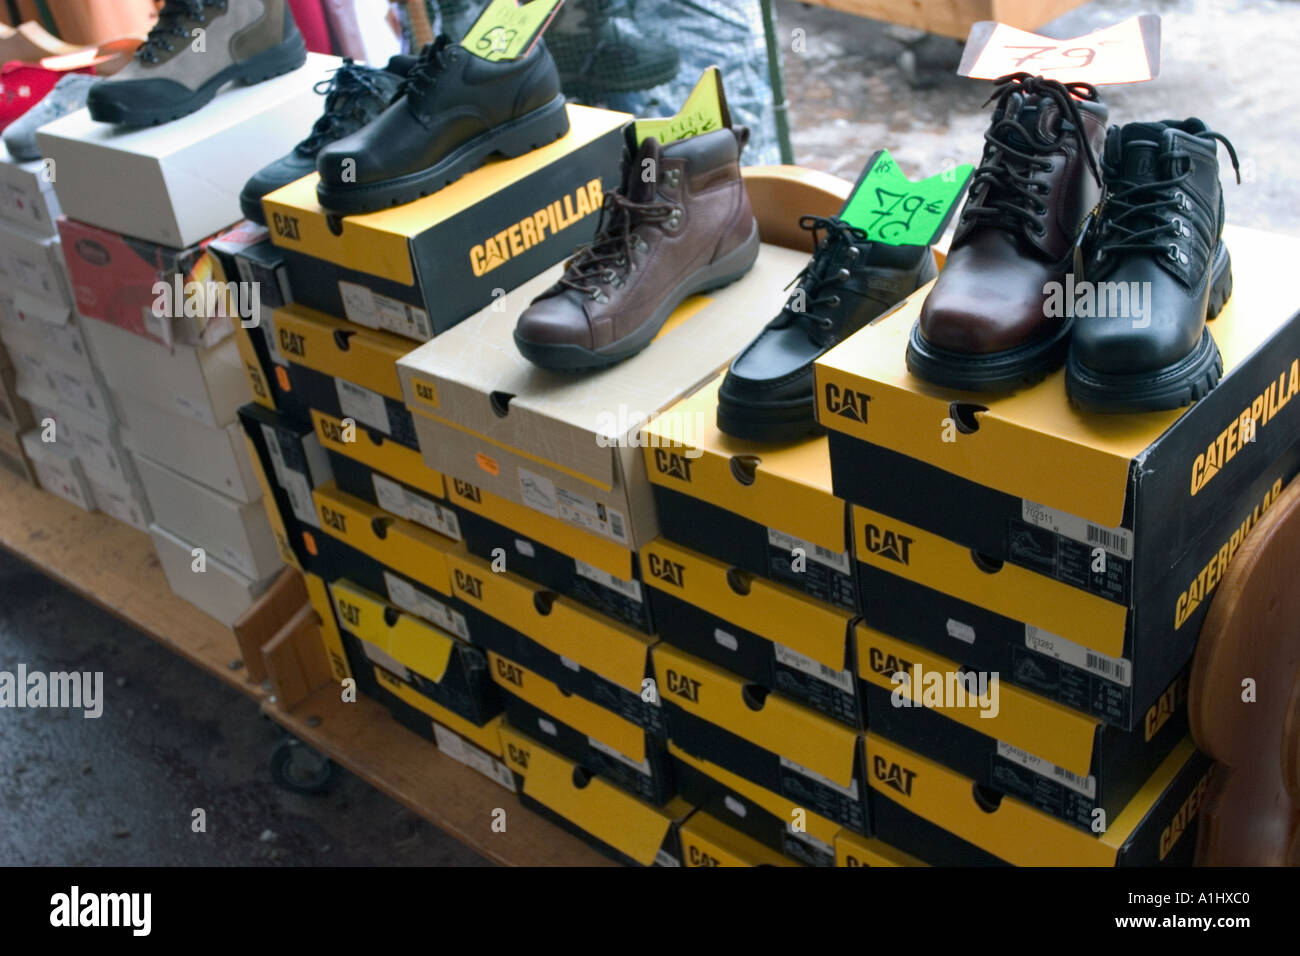 outdoor shop of shoes in france Stock Photo - Alamy